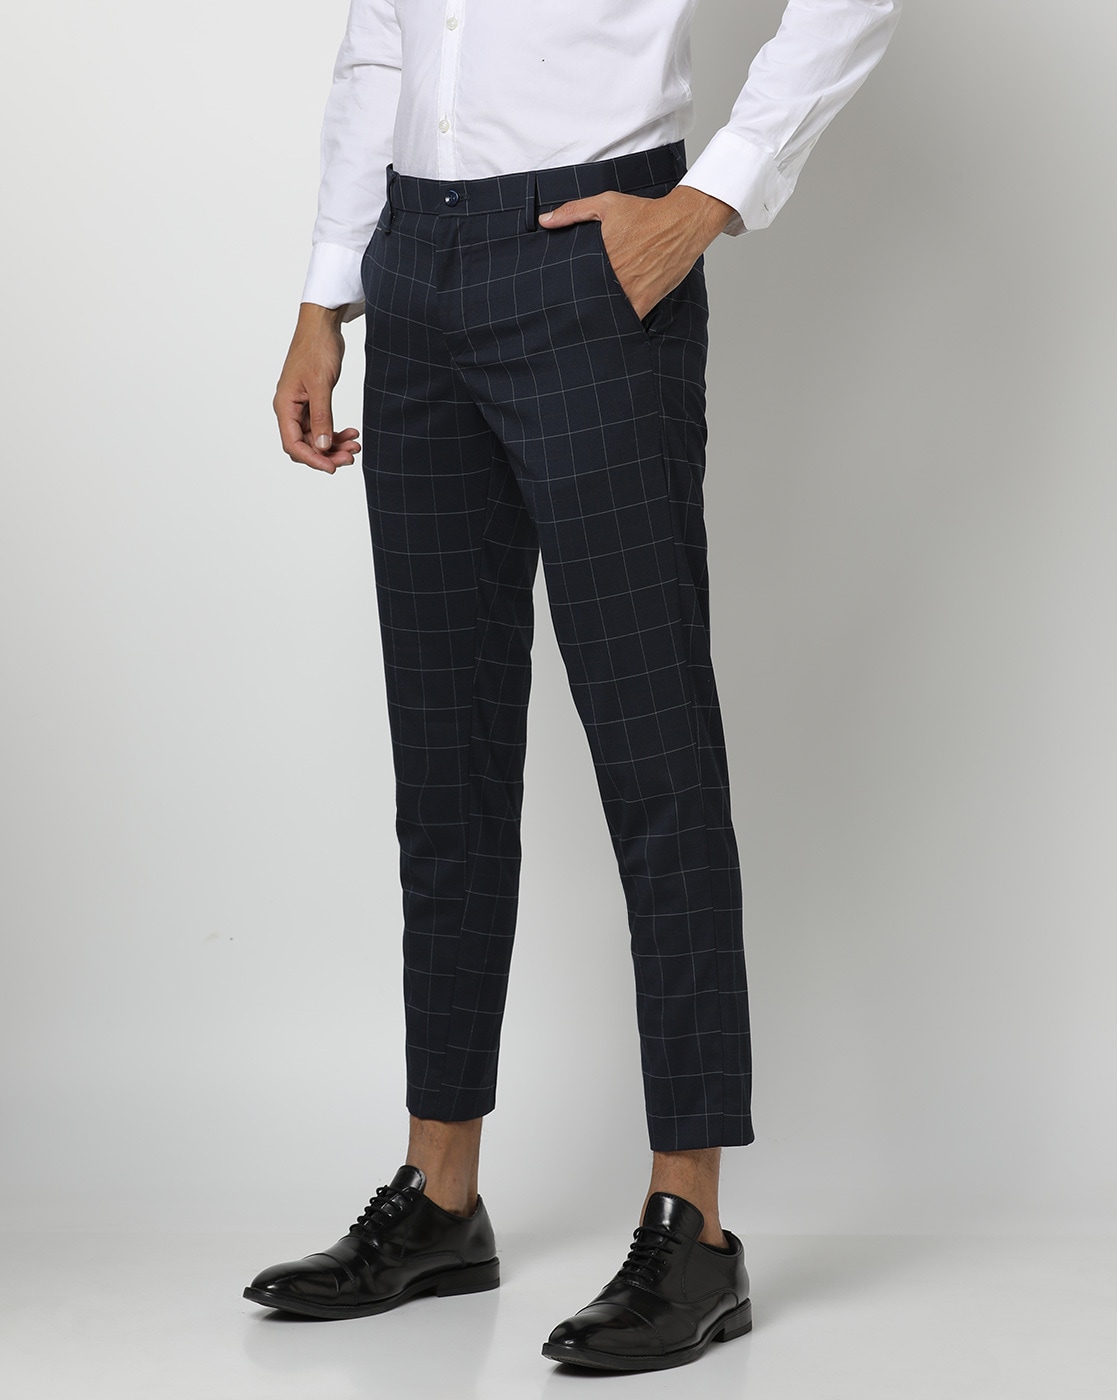 Buy Men Navy Slim Fit Check Flat Front Casual Trousers Online - 742735